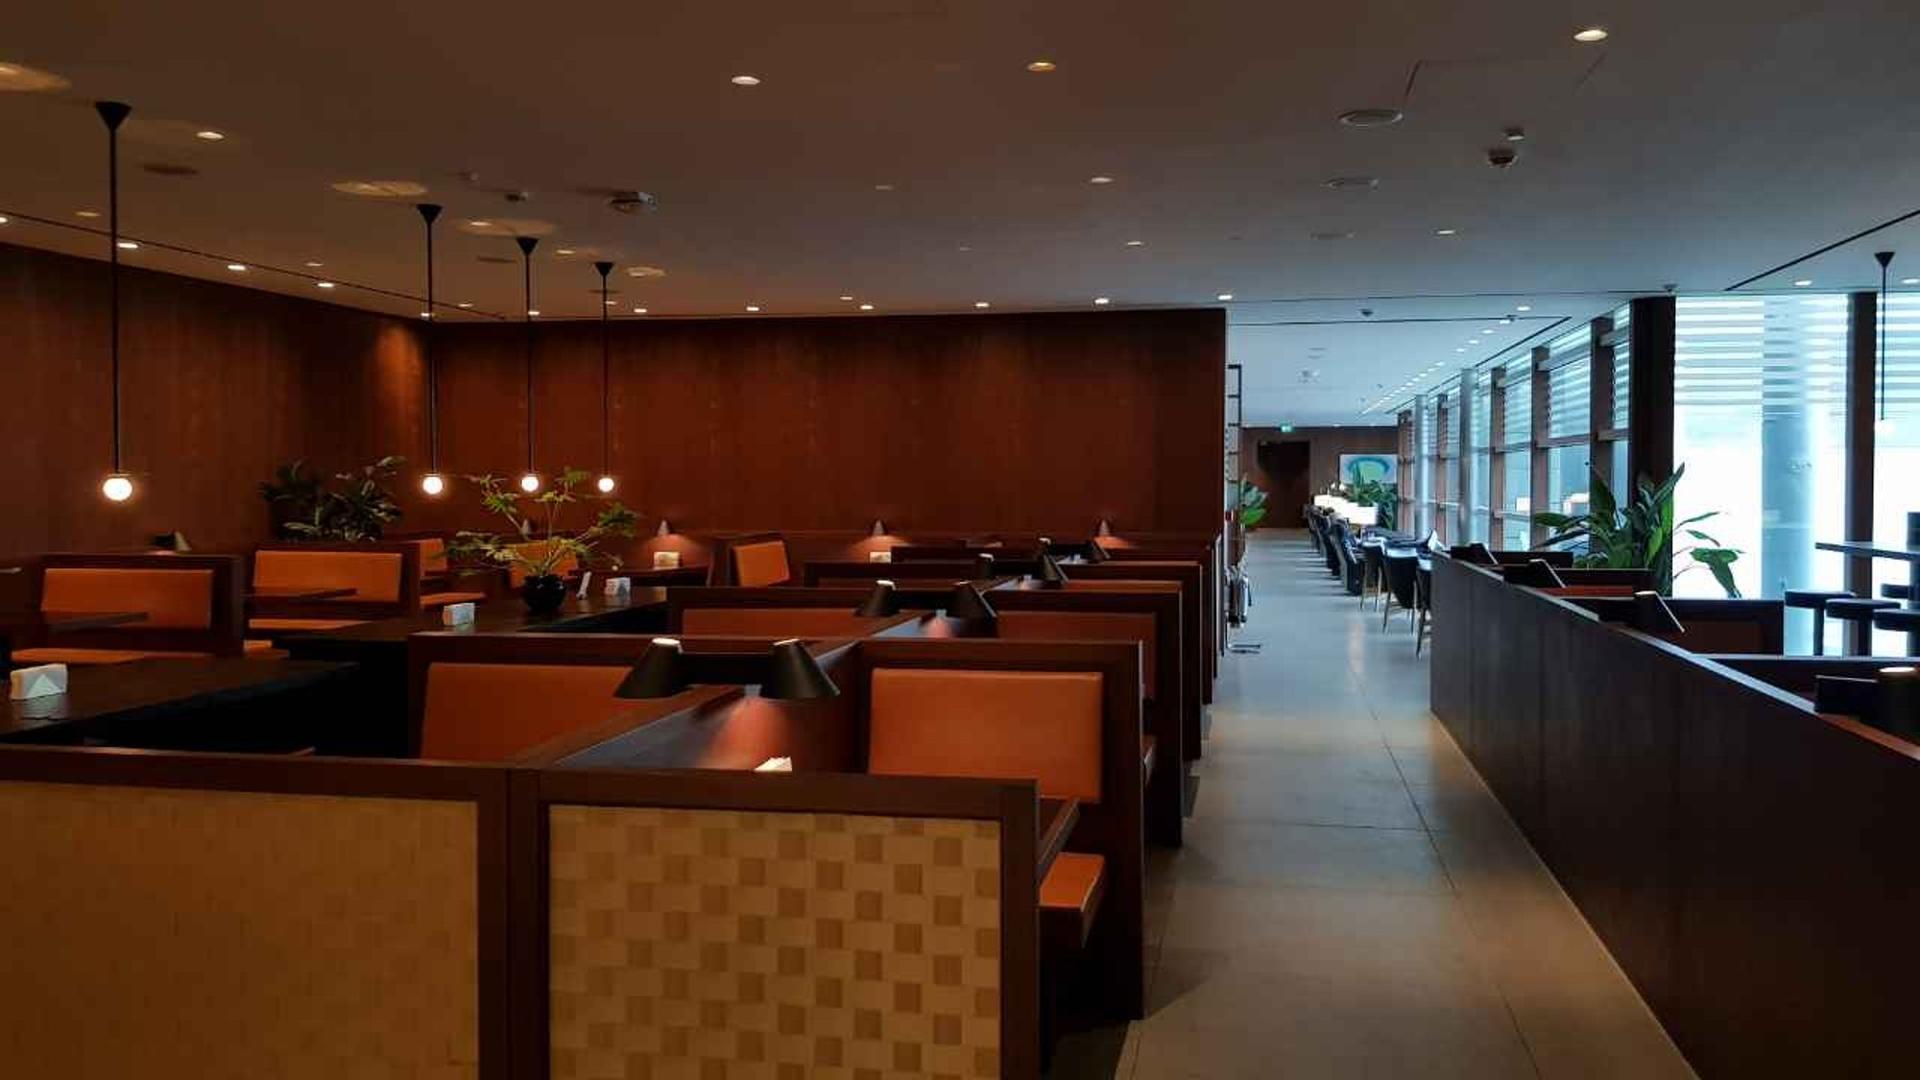 Cathay Pacific Business Class Lounge image 2 of 48